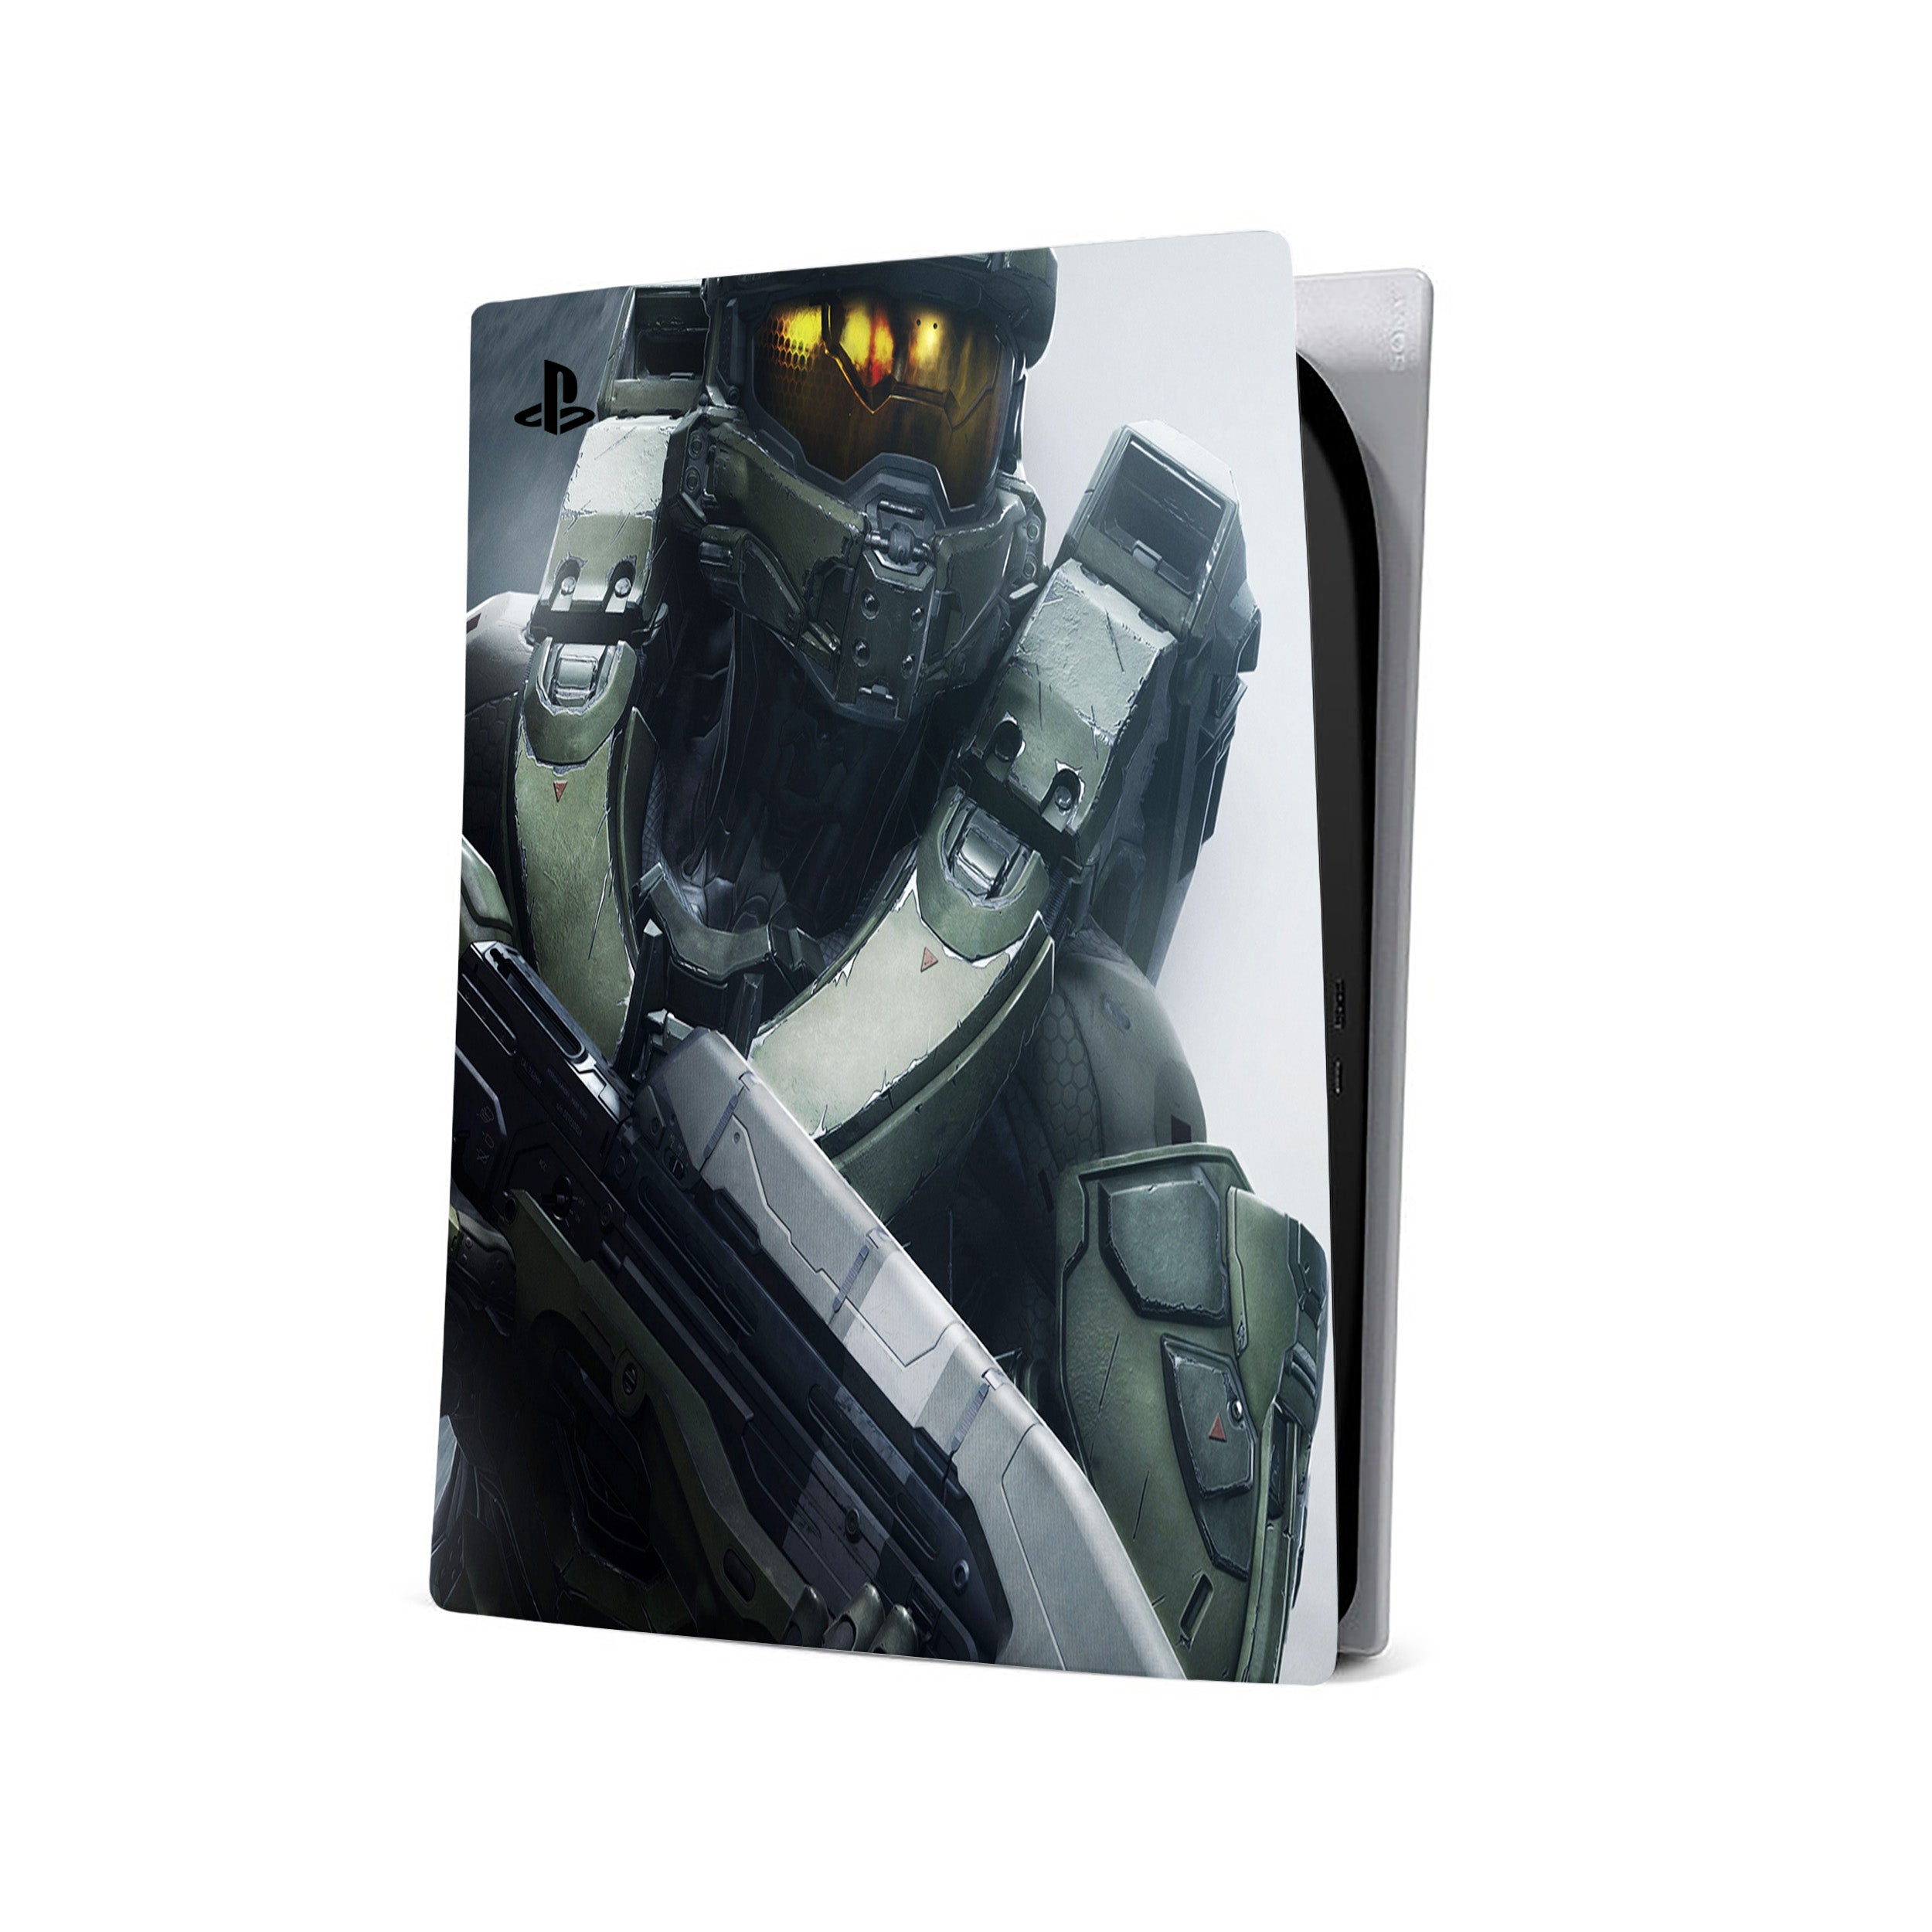 A video game skin featuring a Halo design for the PS5.